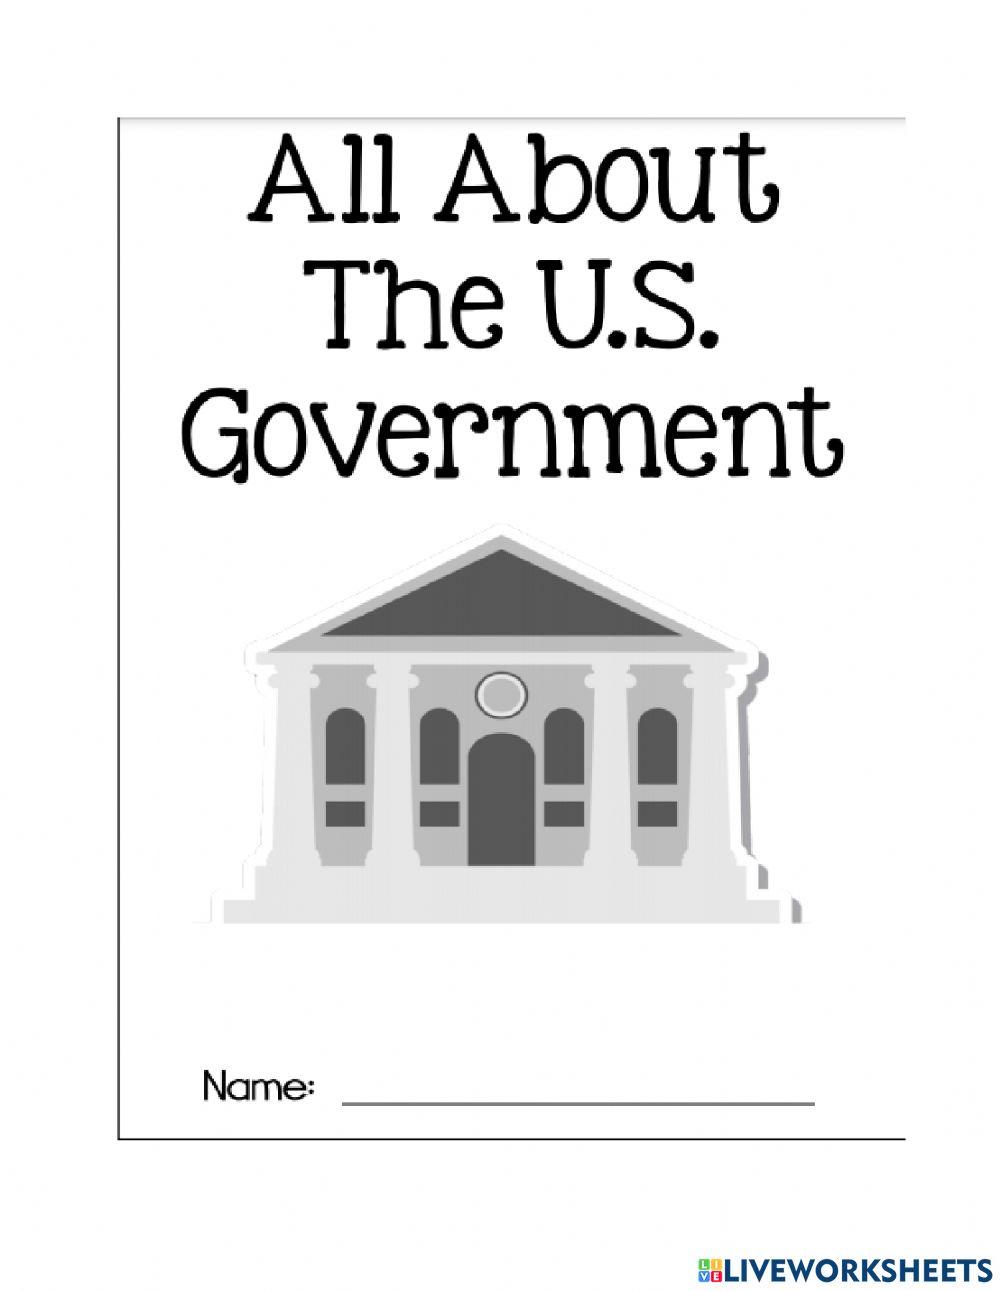 The three branches of government